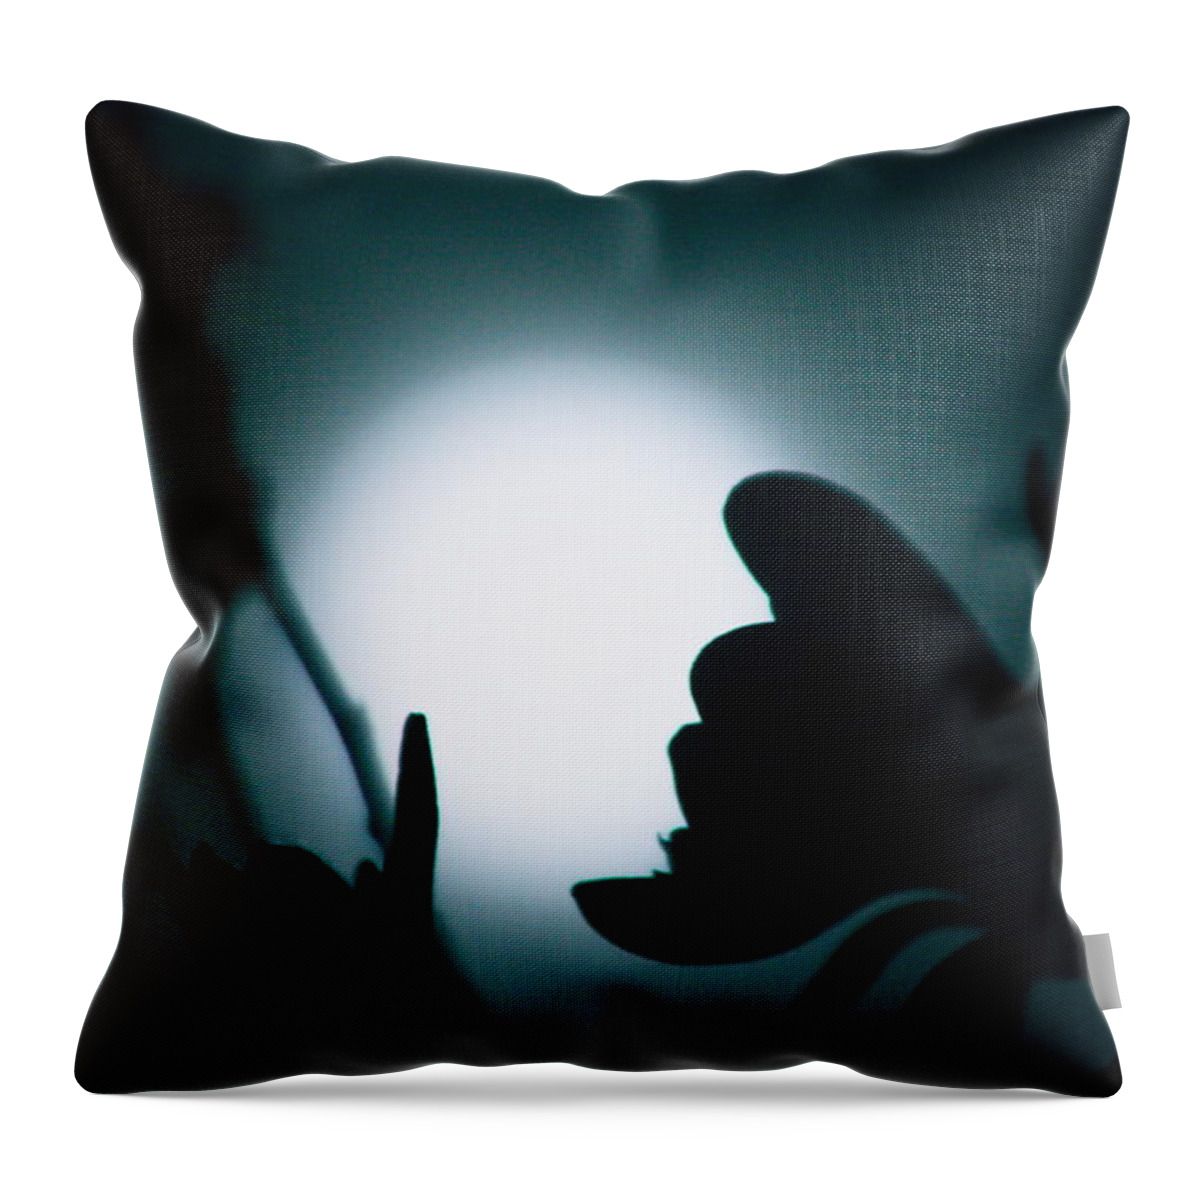 Nunweiler Throw Pillow featuring the photograph Midnight Magnolia by Nunweiler Photography